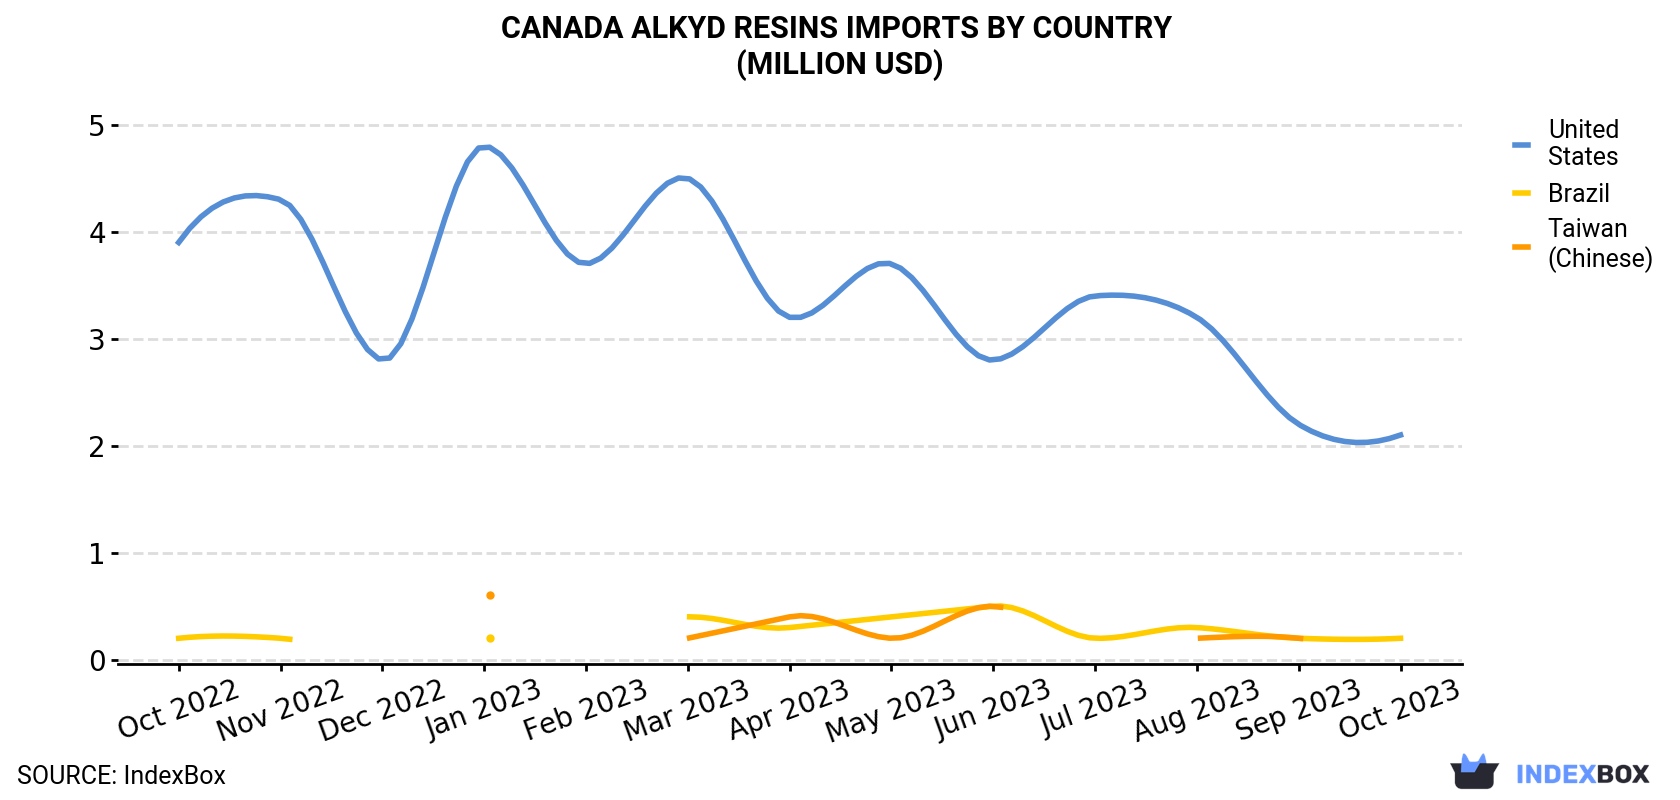 Canada Alkyd Resins Imports By Country (Million USD)